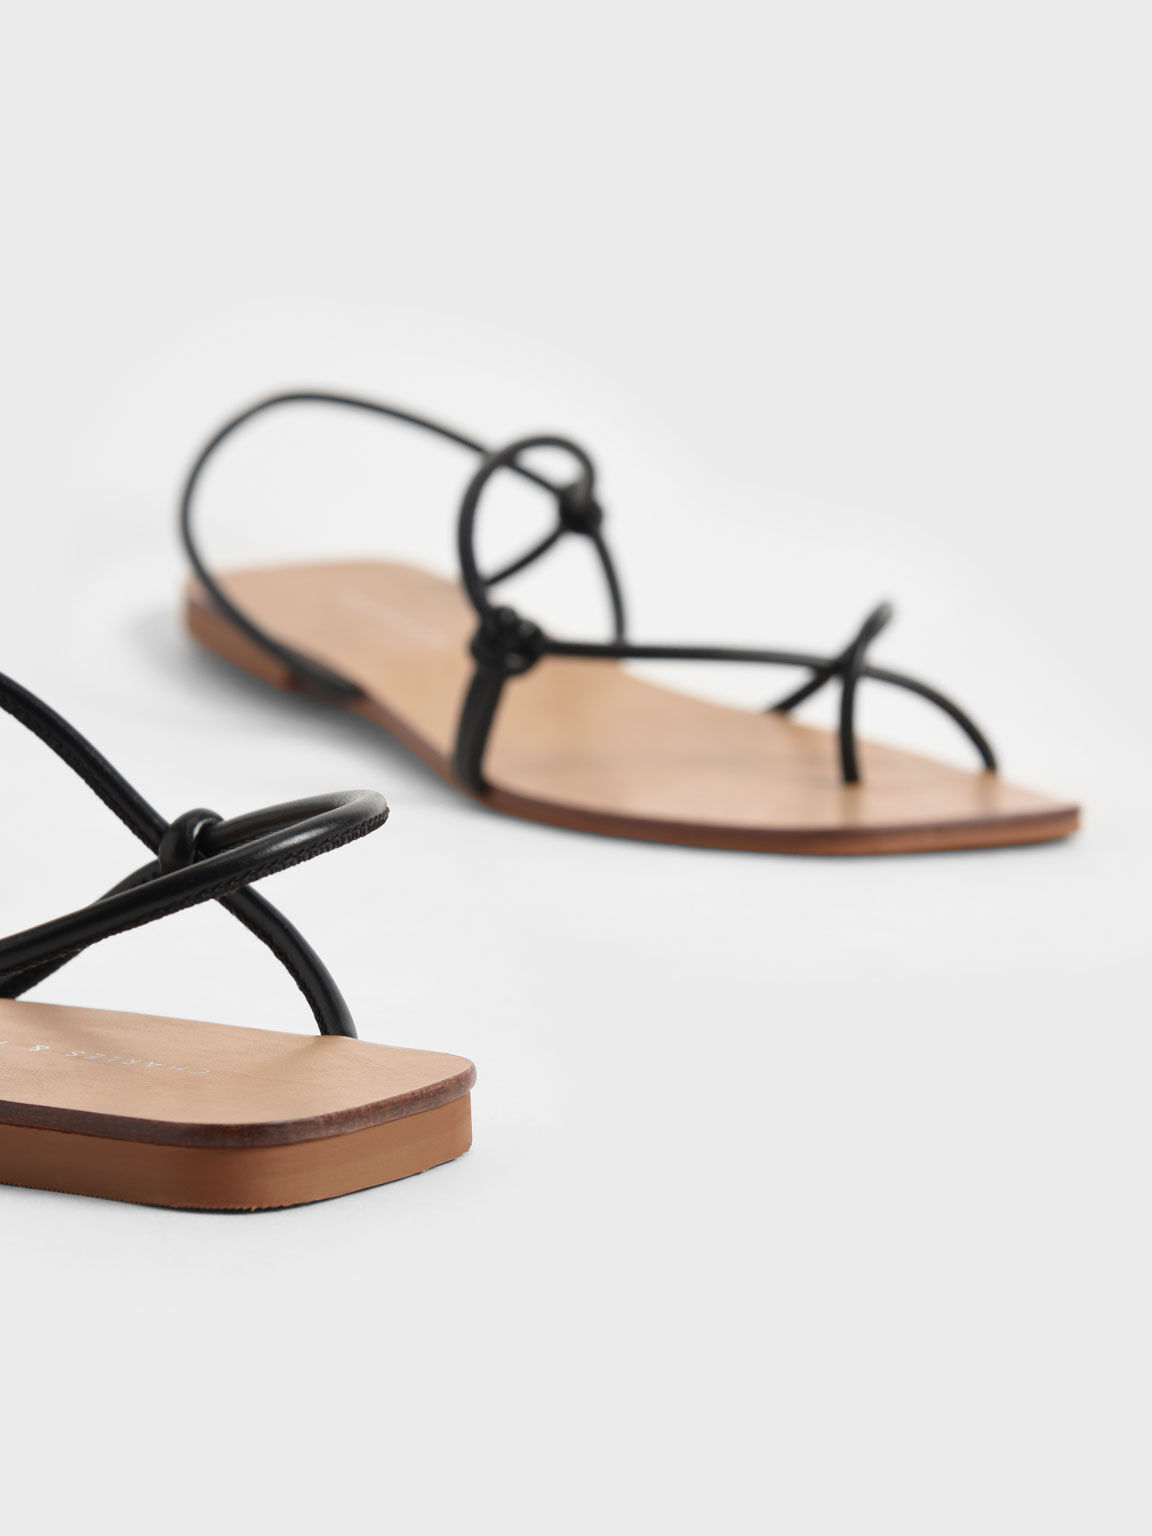 Black Strappy Knotted Thong Sandals - CHARLES & KEITH UK